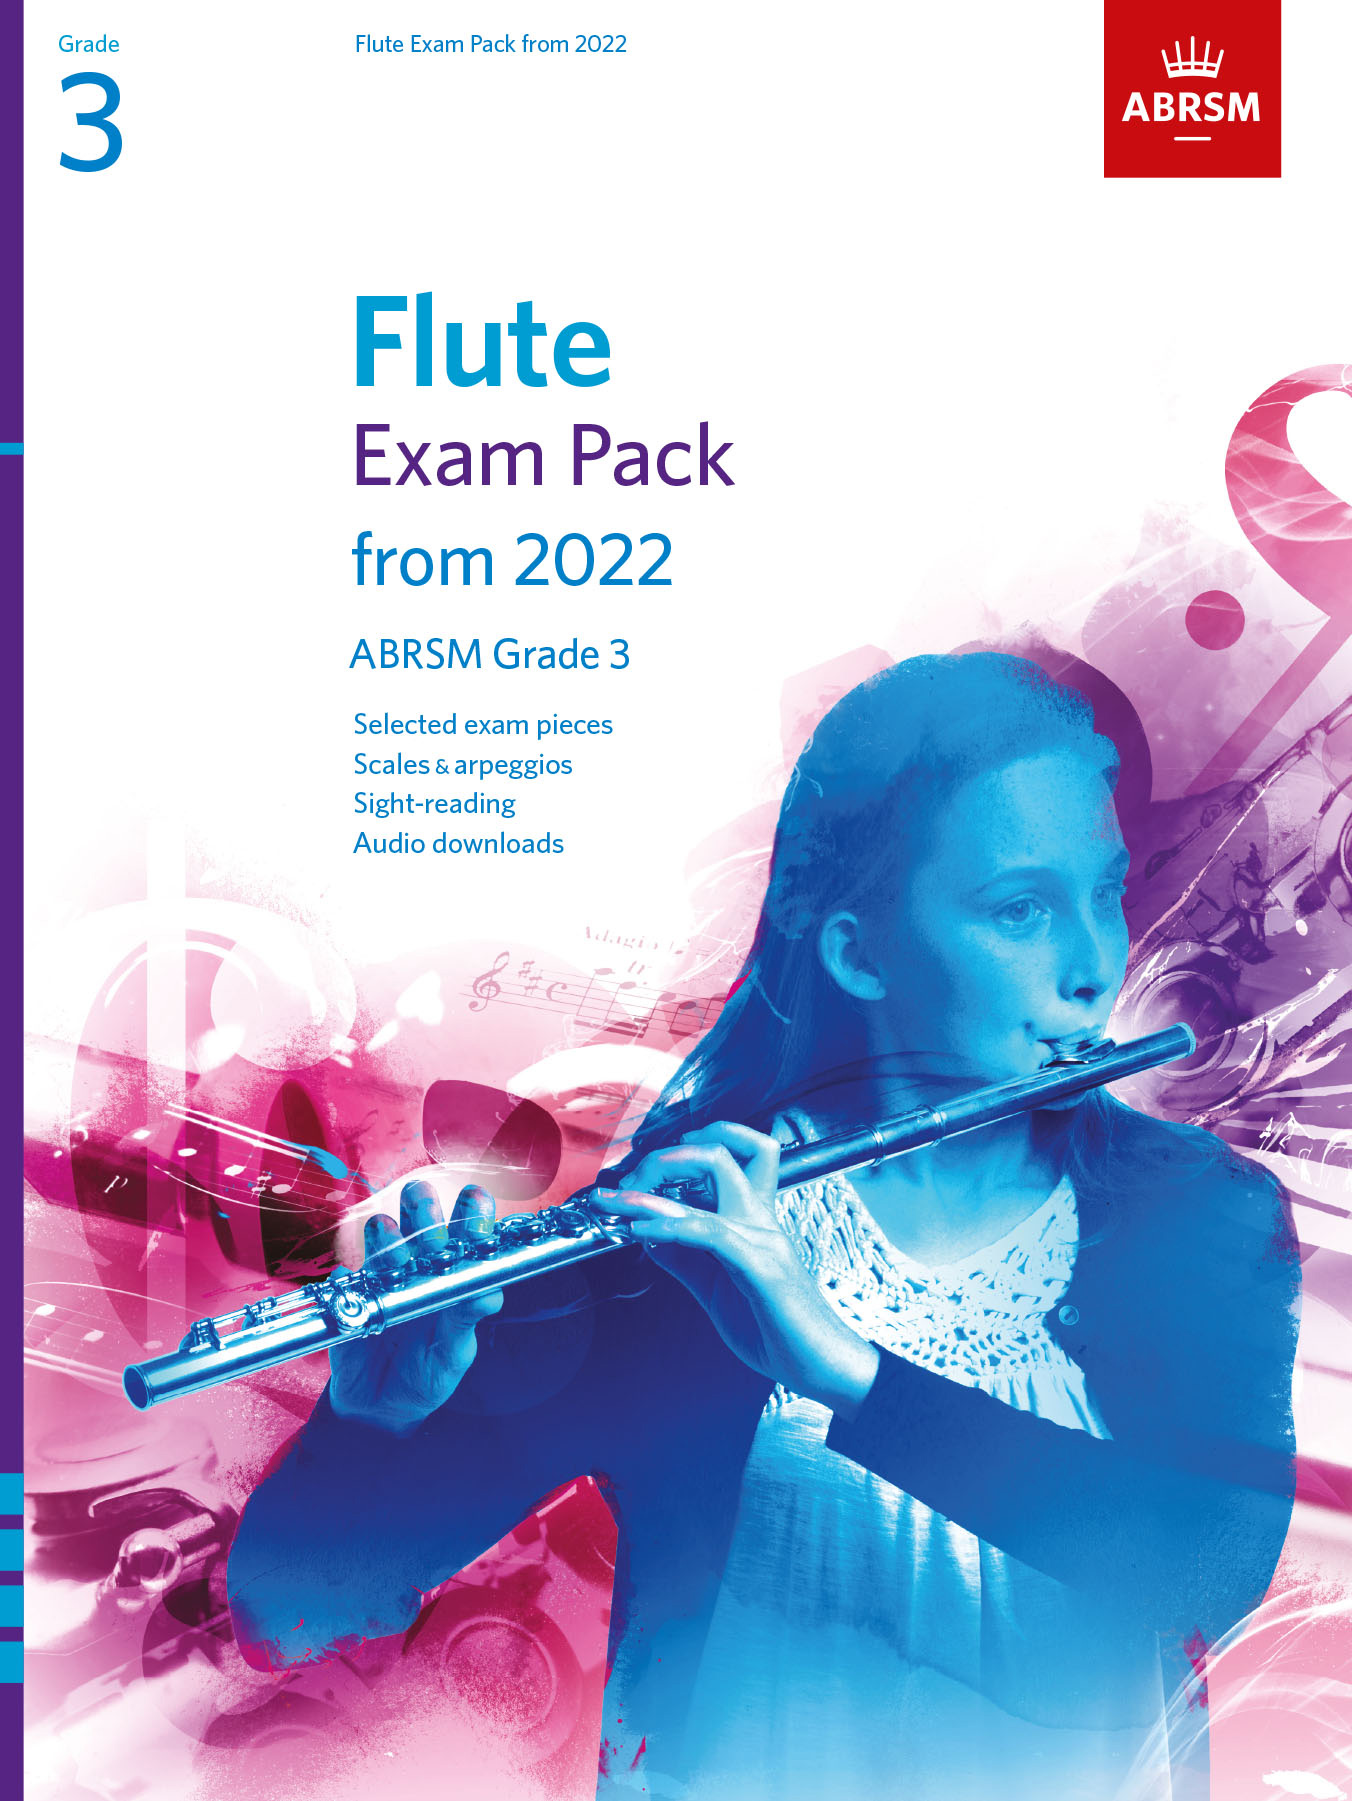 Flute Exam Pack From 2022 Grade 3 Complete Abrsm Sheet Music Songbook